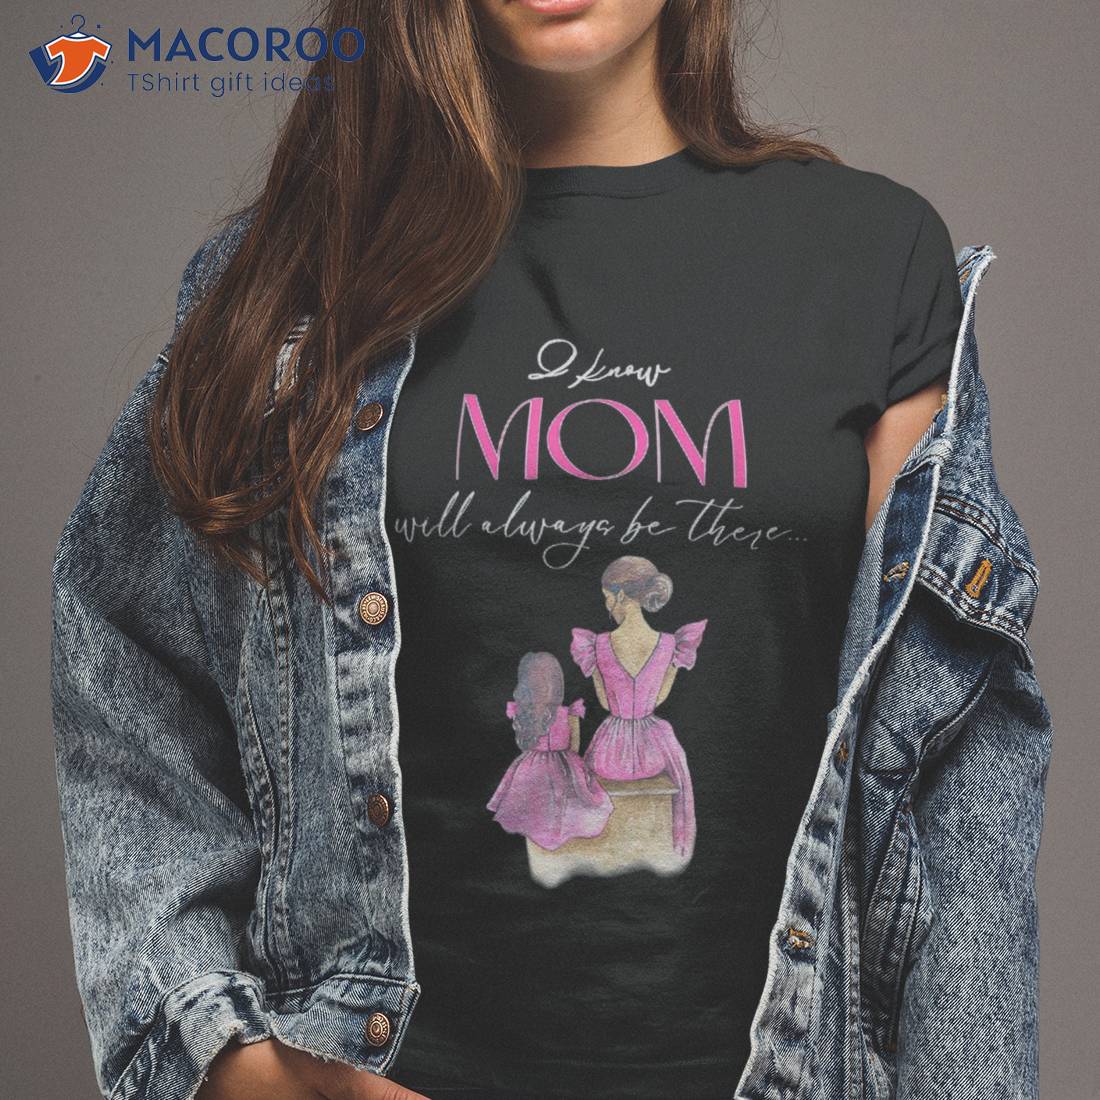 https://images.macoroo.com/wp-content/uploads/2023/05/ladies-super-mom-great-mother-s-day-gifts-for-shirt-tshirt-2.jpg